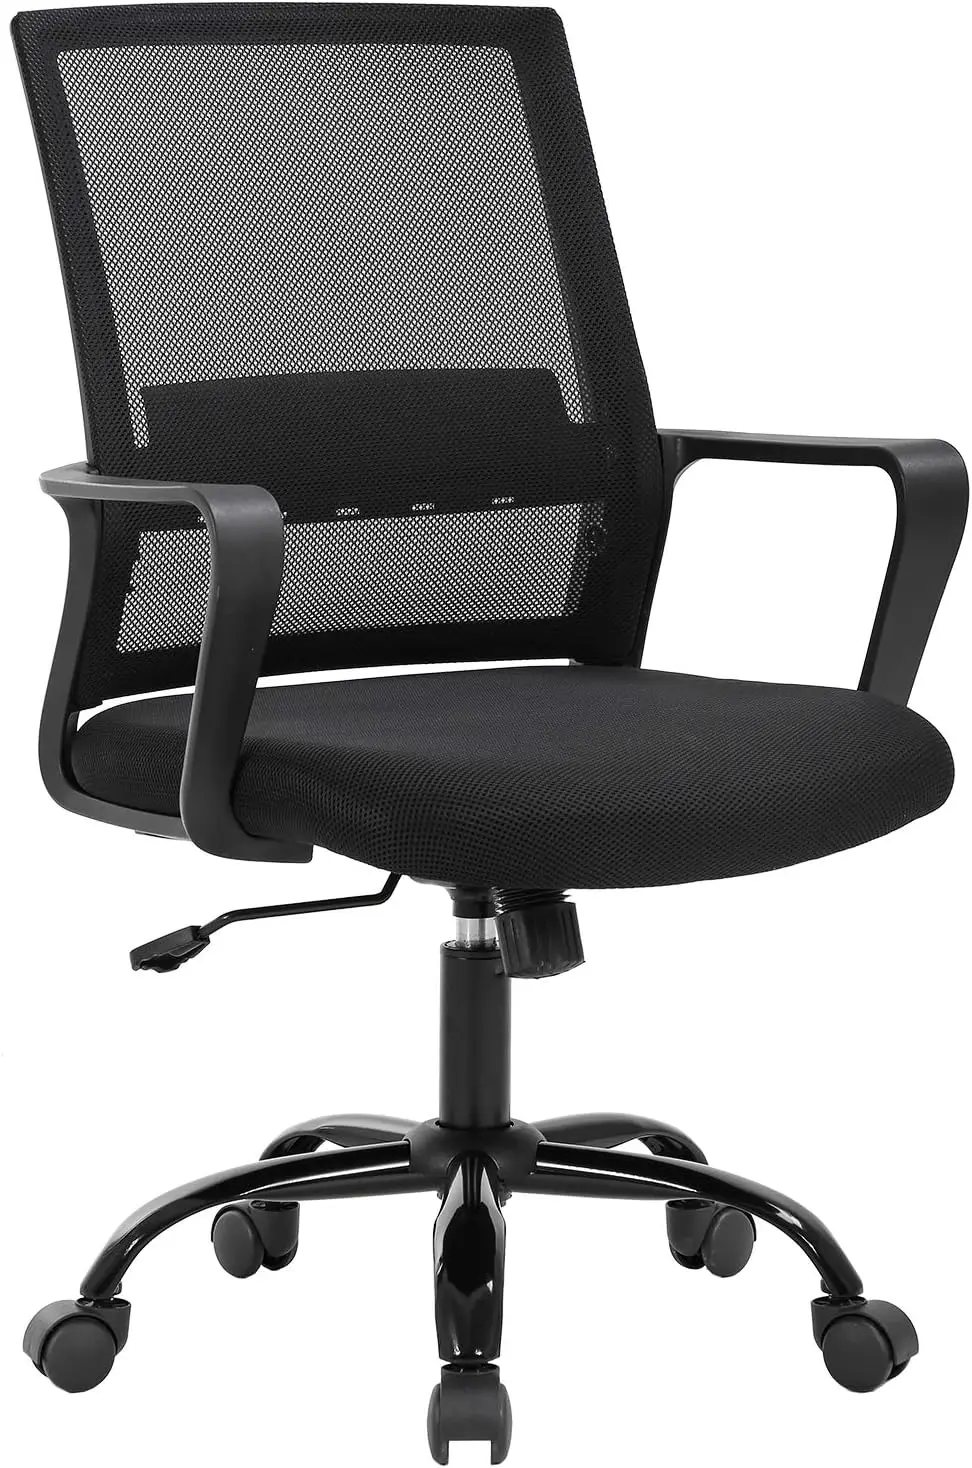 

Home Office Chair Ergonomic Desk Chair Swivel Rolling Computer Chair Executive Lumbar Support Task Mesh Adjustable Stool